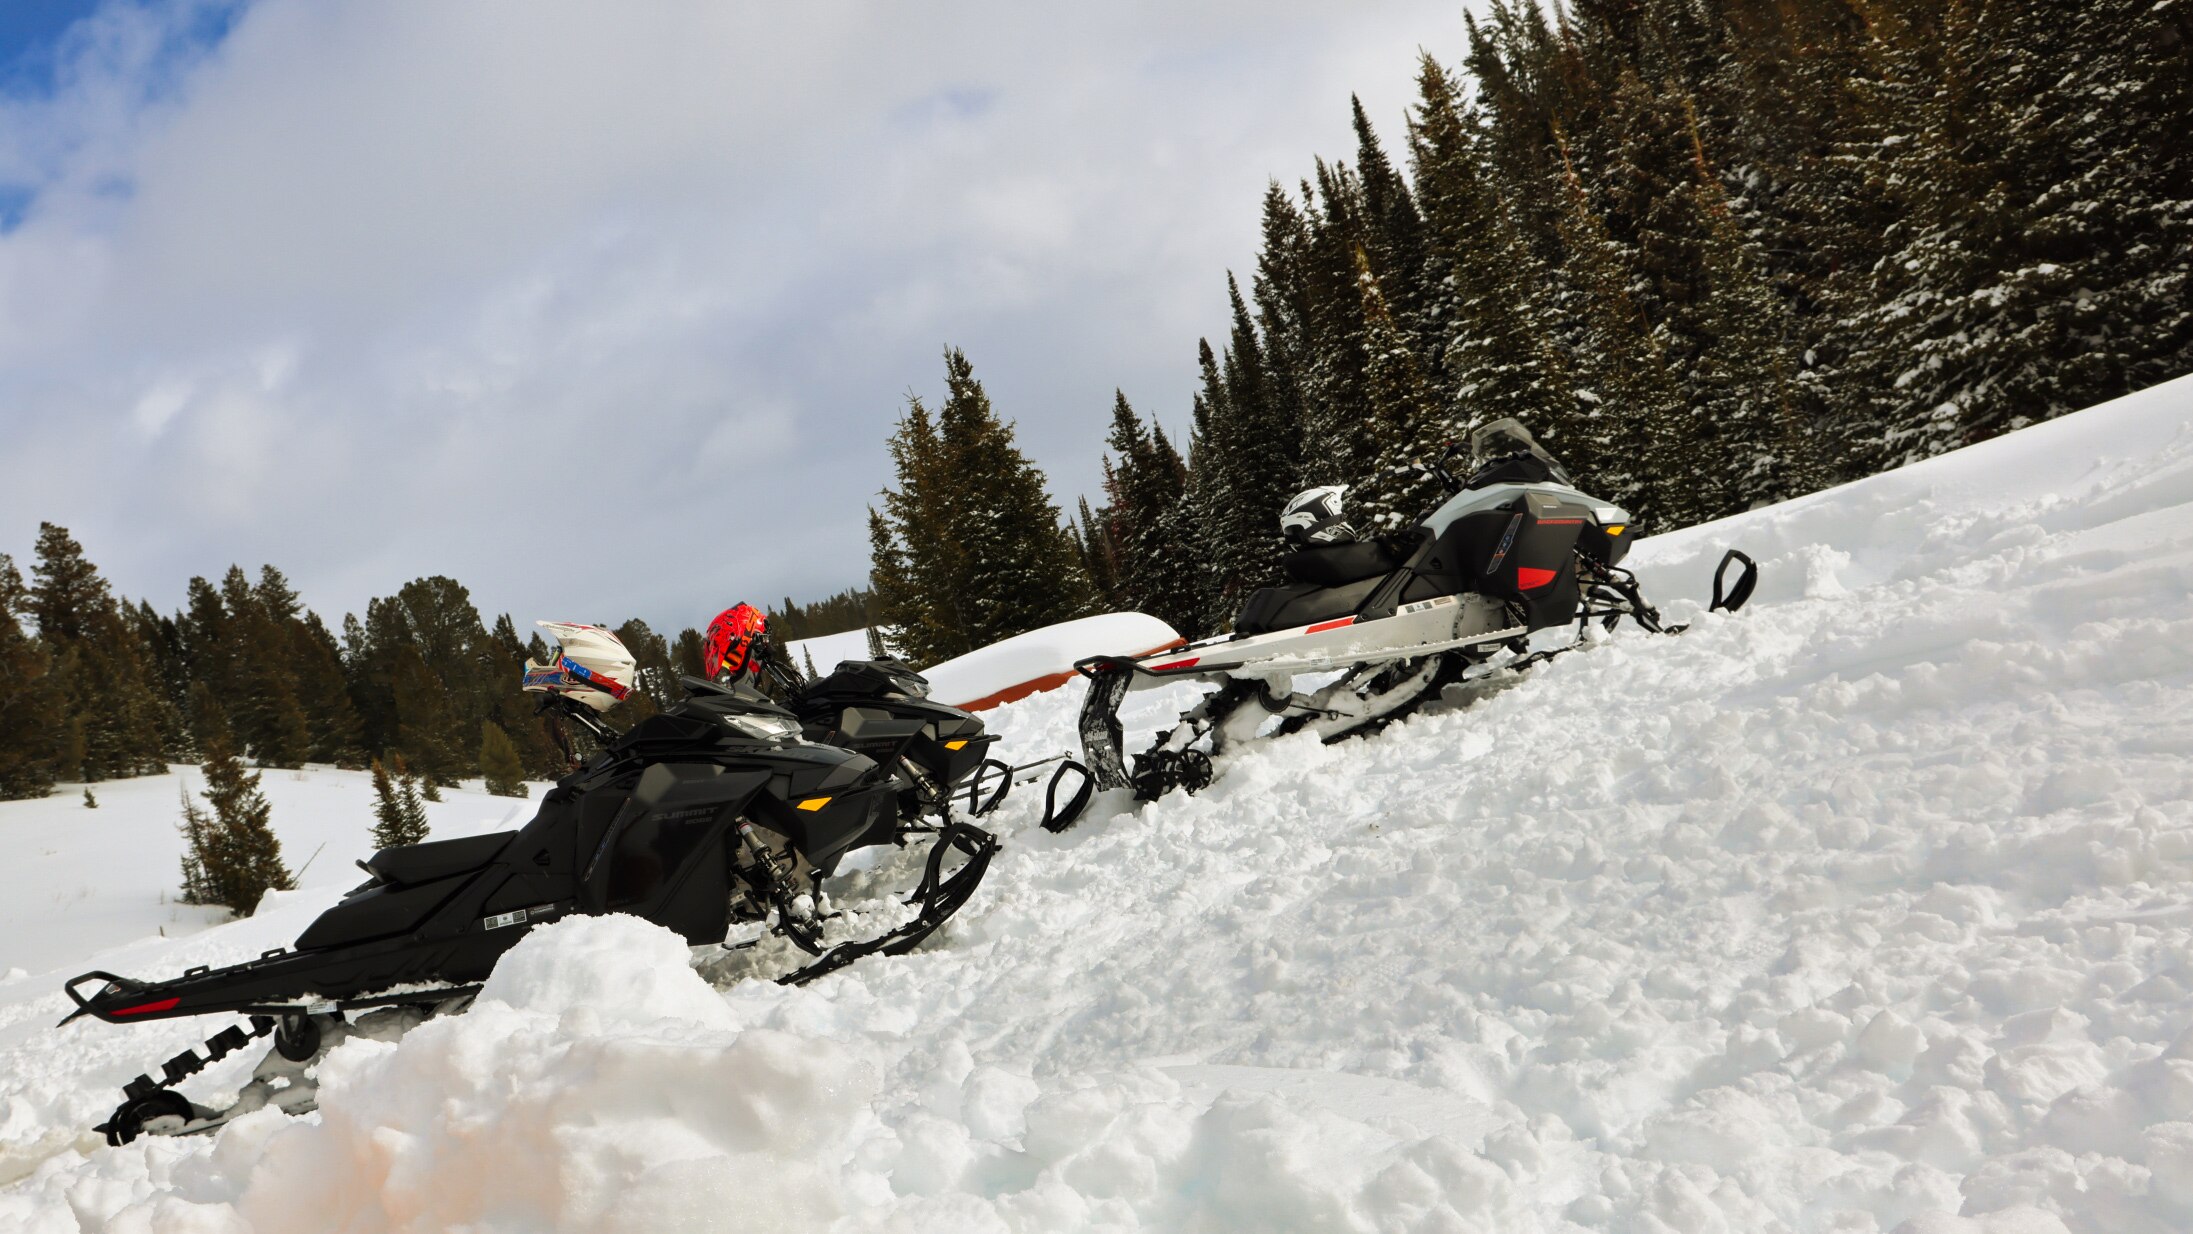 Two snowmobiles parked in the snow